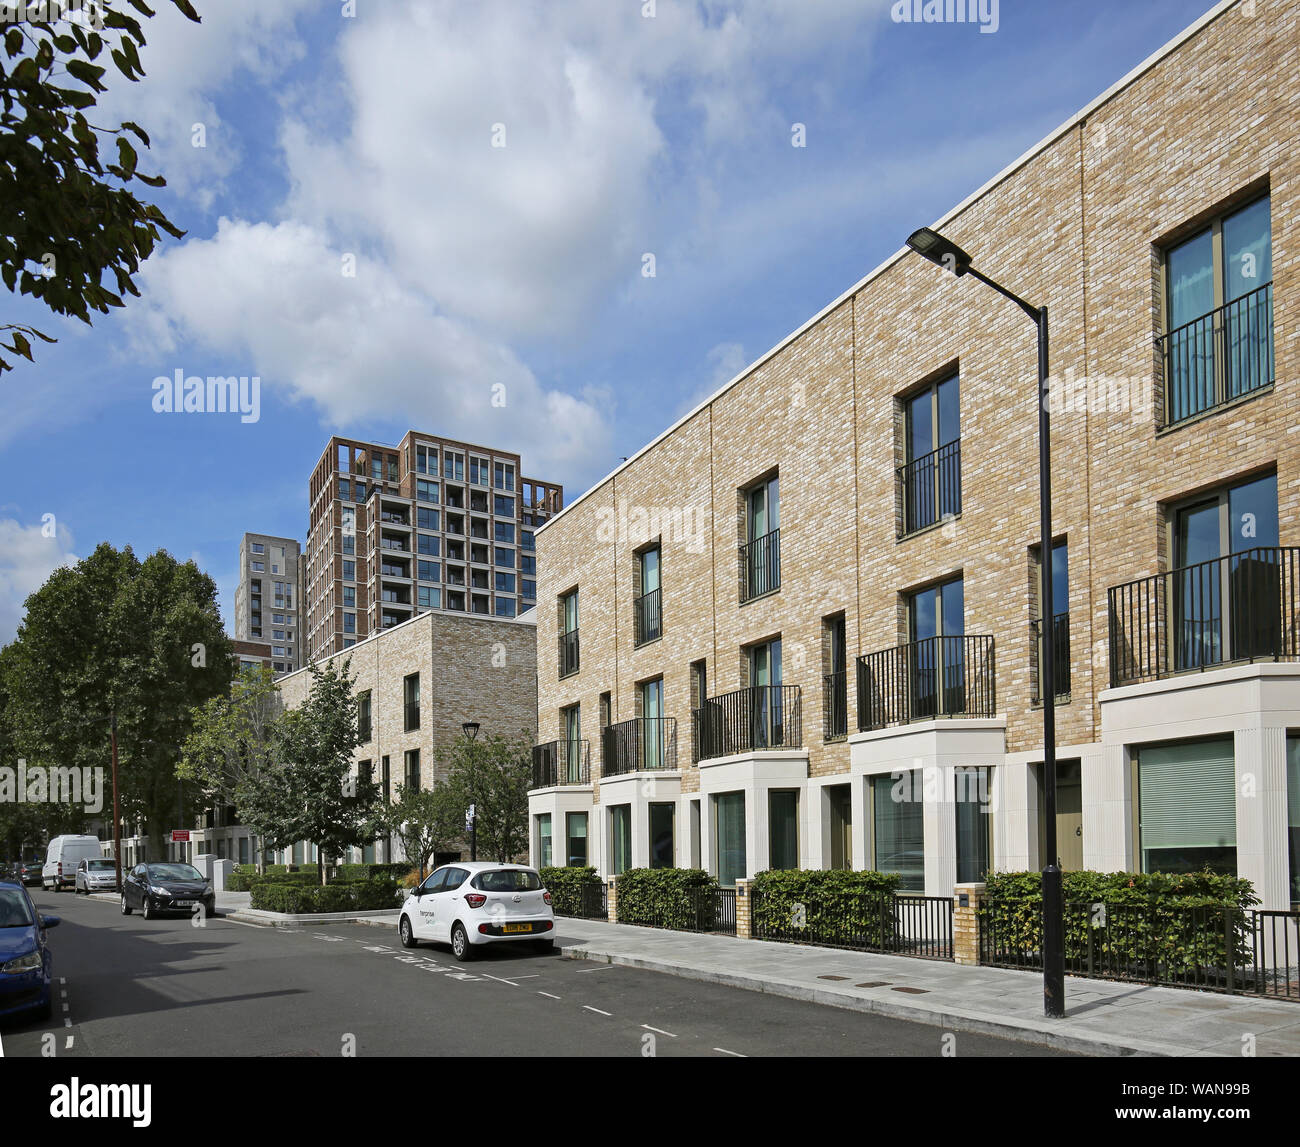 New housing on Wansey Street, London UK. Part of Elephant Park - the huge redevelopment project in the formerly run-down Elephant and Castle area. Stock Photo